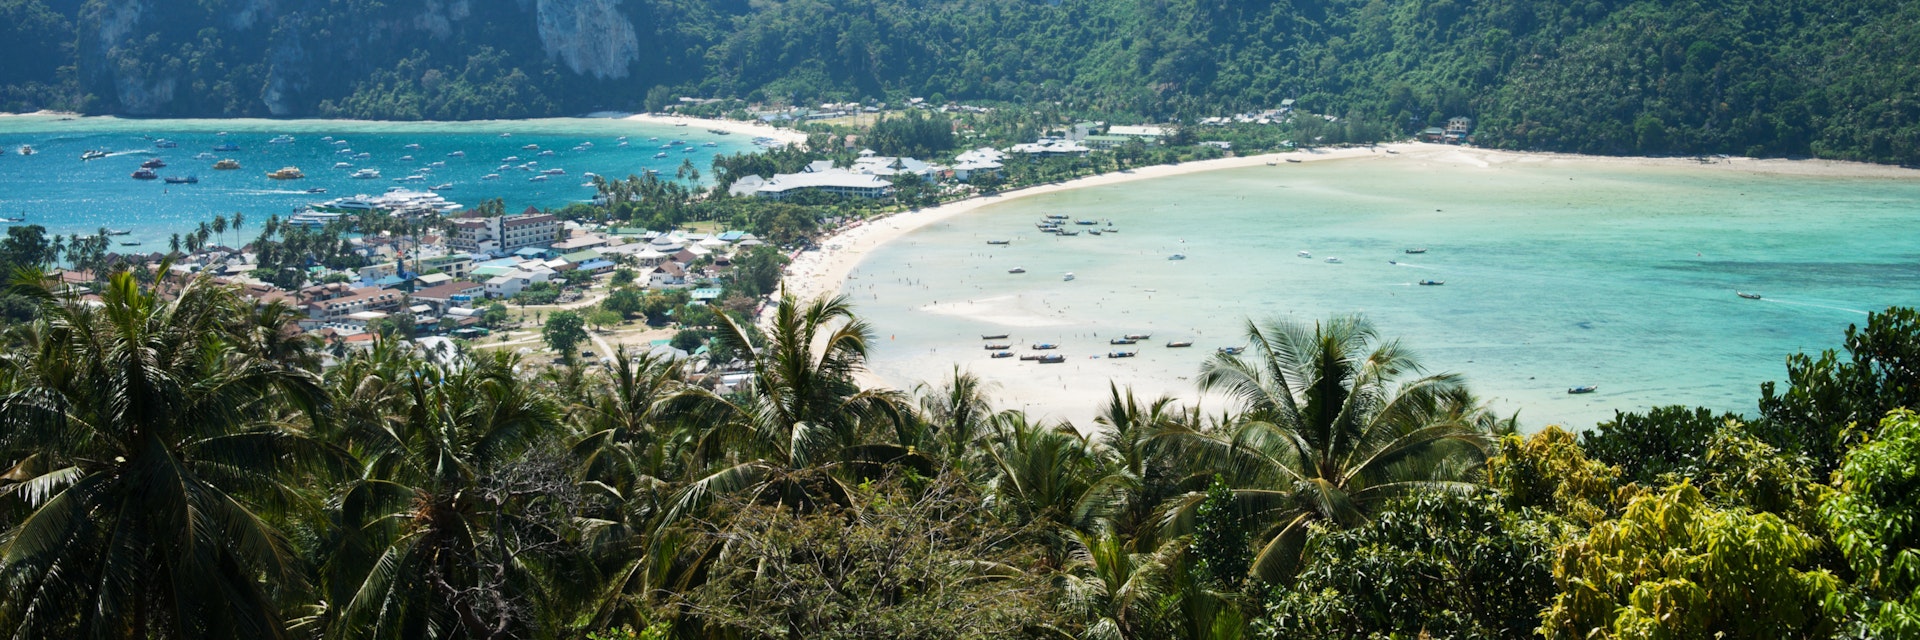 Ko Phi Phi view from top, Thailand